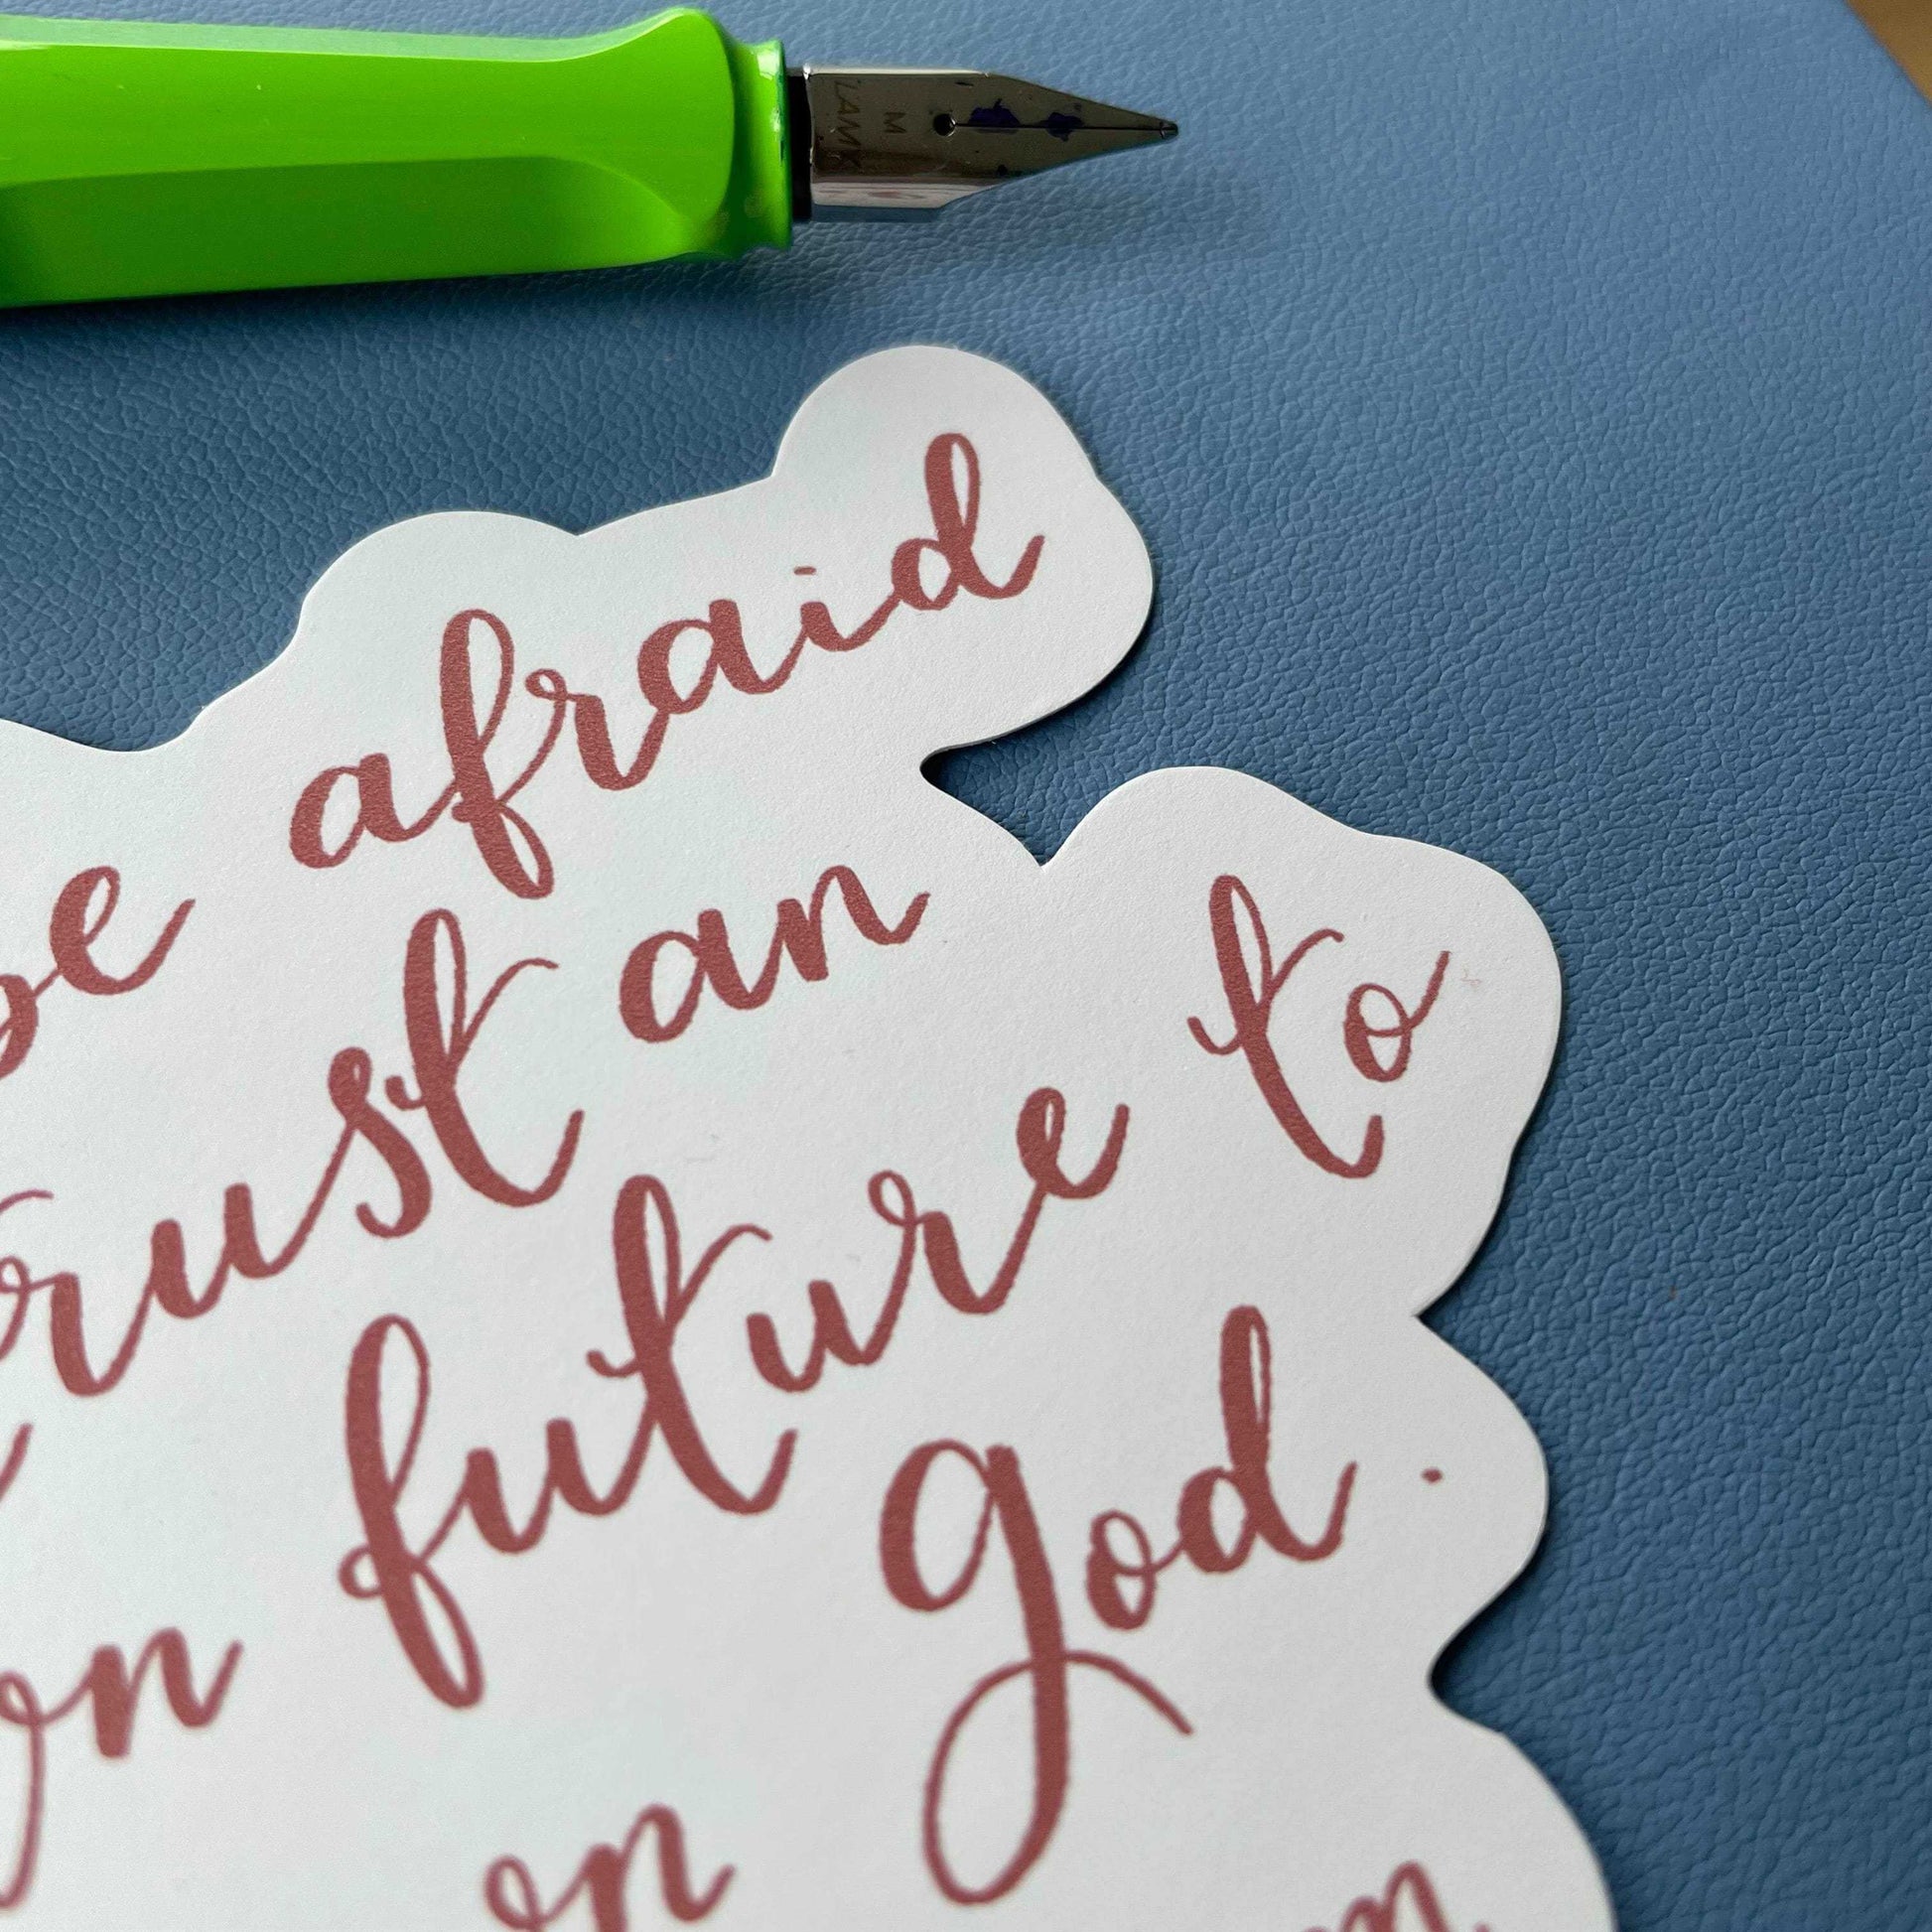 Christian sticker, Corrie Ten Boom quote And Hope Designs stickers